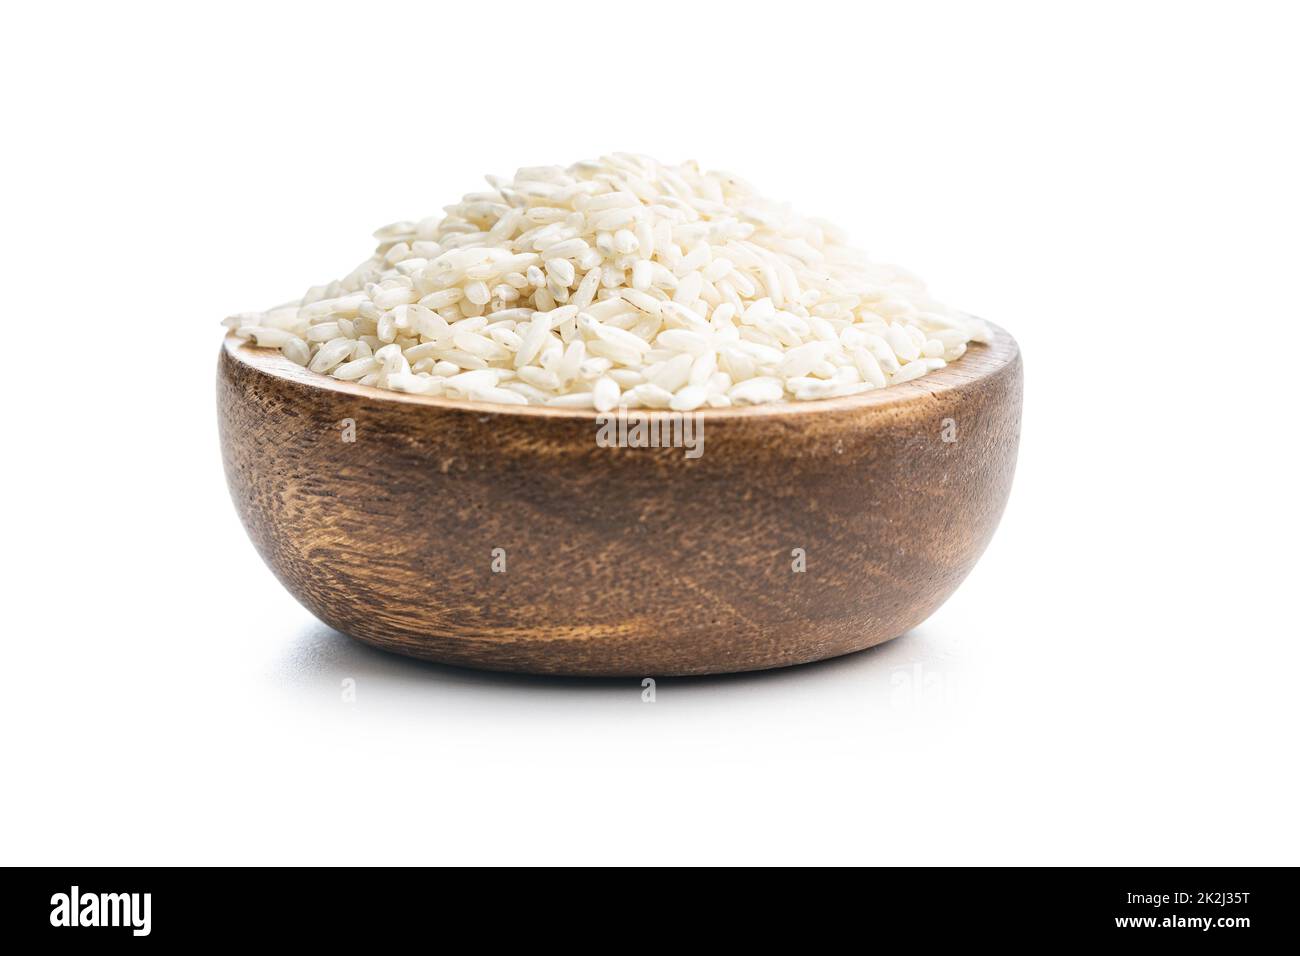 Uncooked Carnaroli risotto rice in bowl isolated on white background. Stock Photo